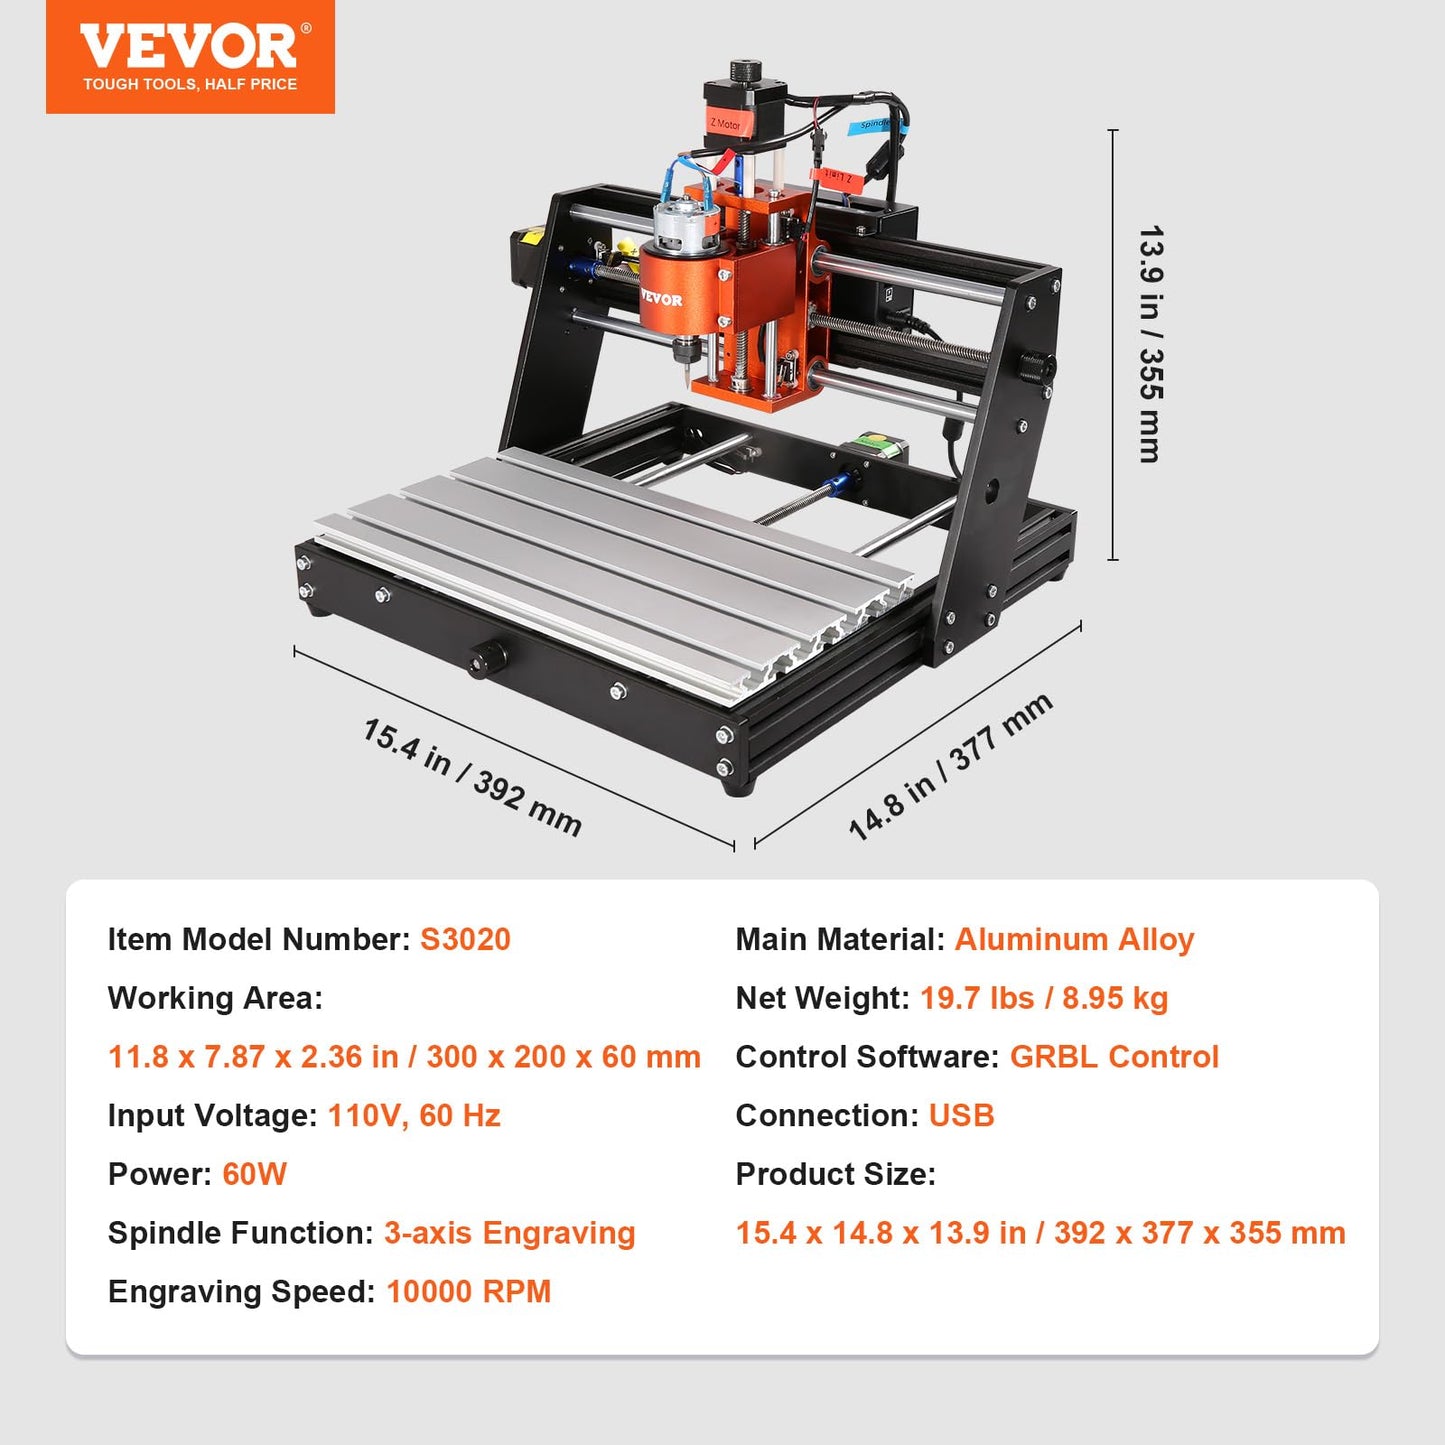 VEVOR CNC Router Machine, 120W 3 Axis GRBL Control Wood Engraving Carving Milling Machine Kit, 300 x 200 x 60 mm/11.8 x 7.87 x 2.36 in Working Area